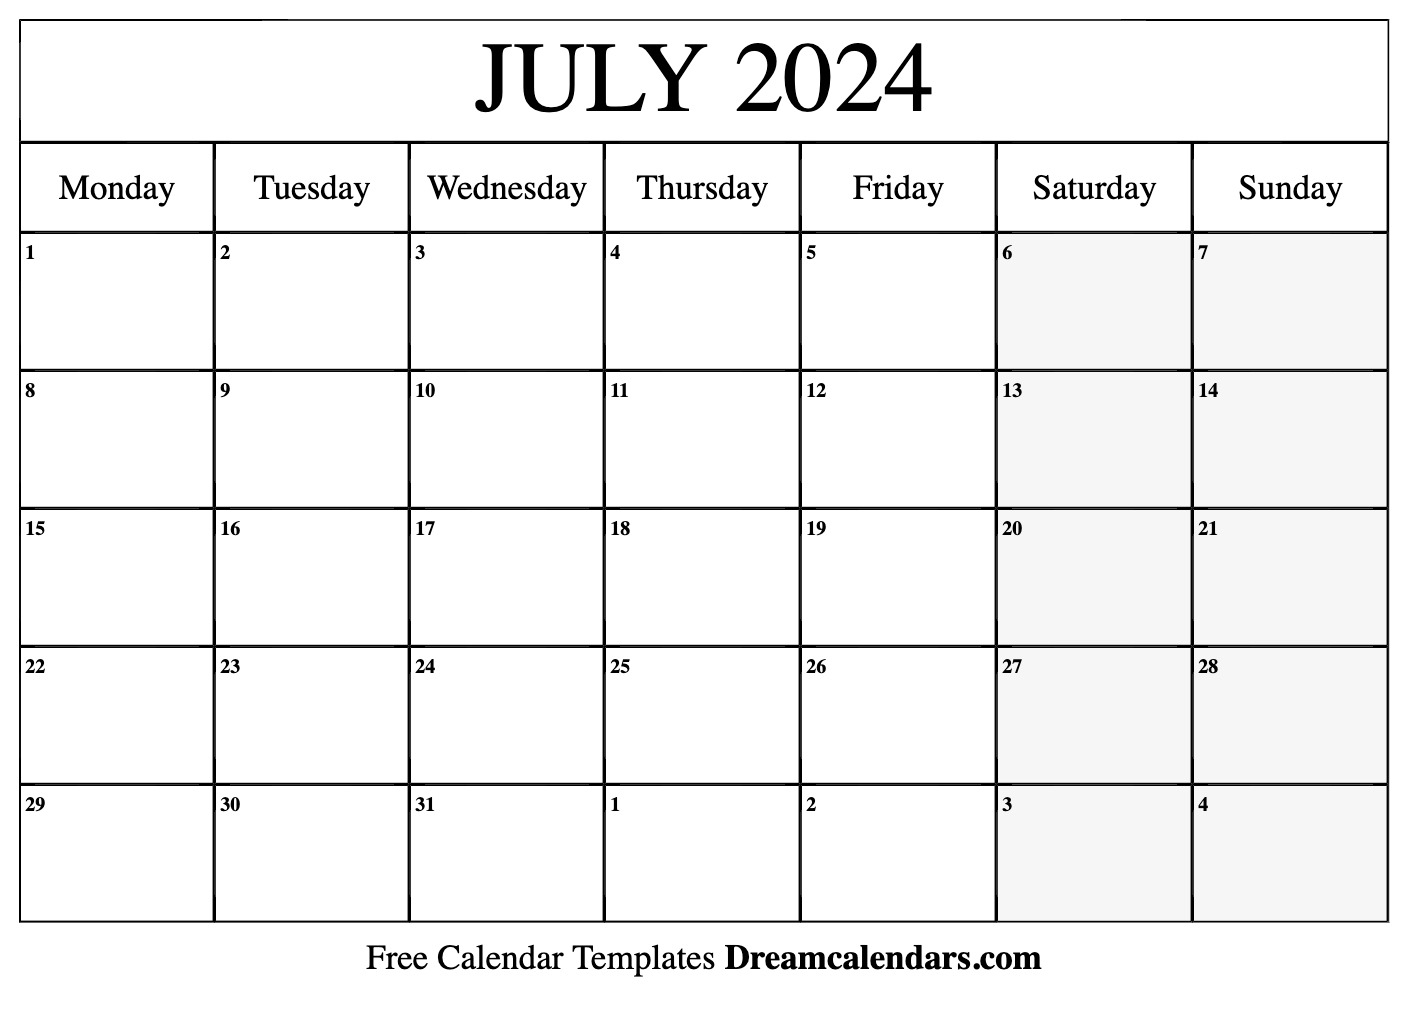 July 2024 Calendar | Free Blank Printable With Holidays for July 2024 Blank Printable Calendar